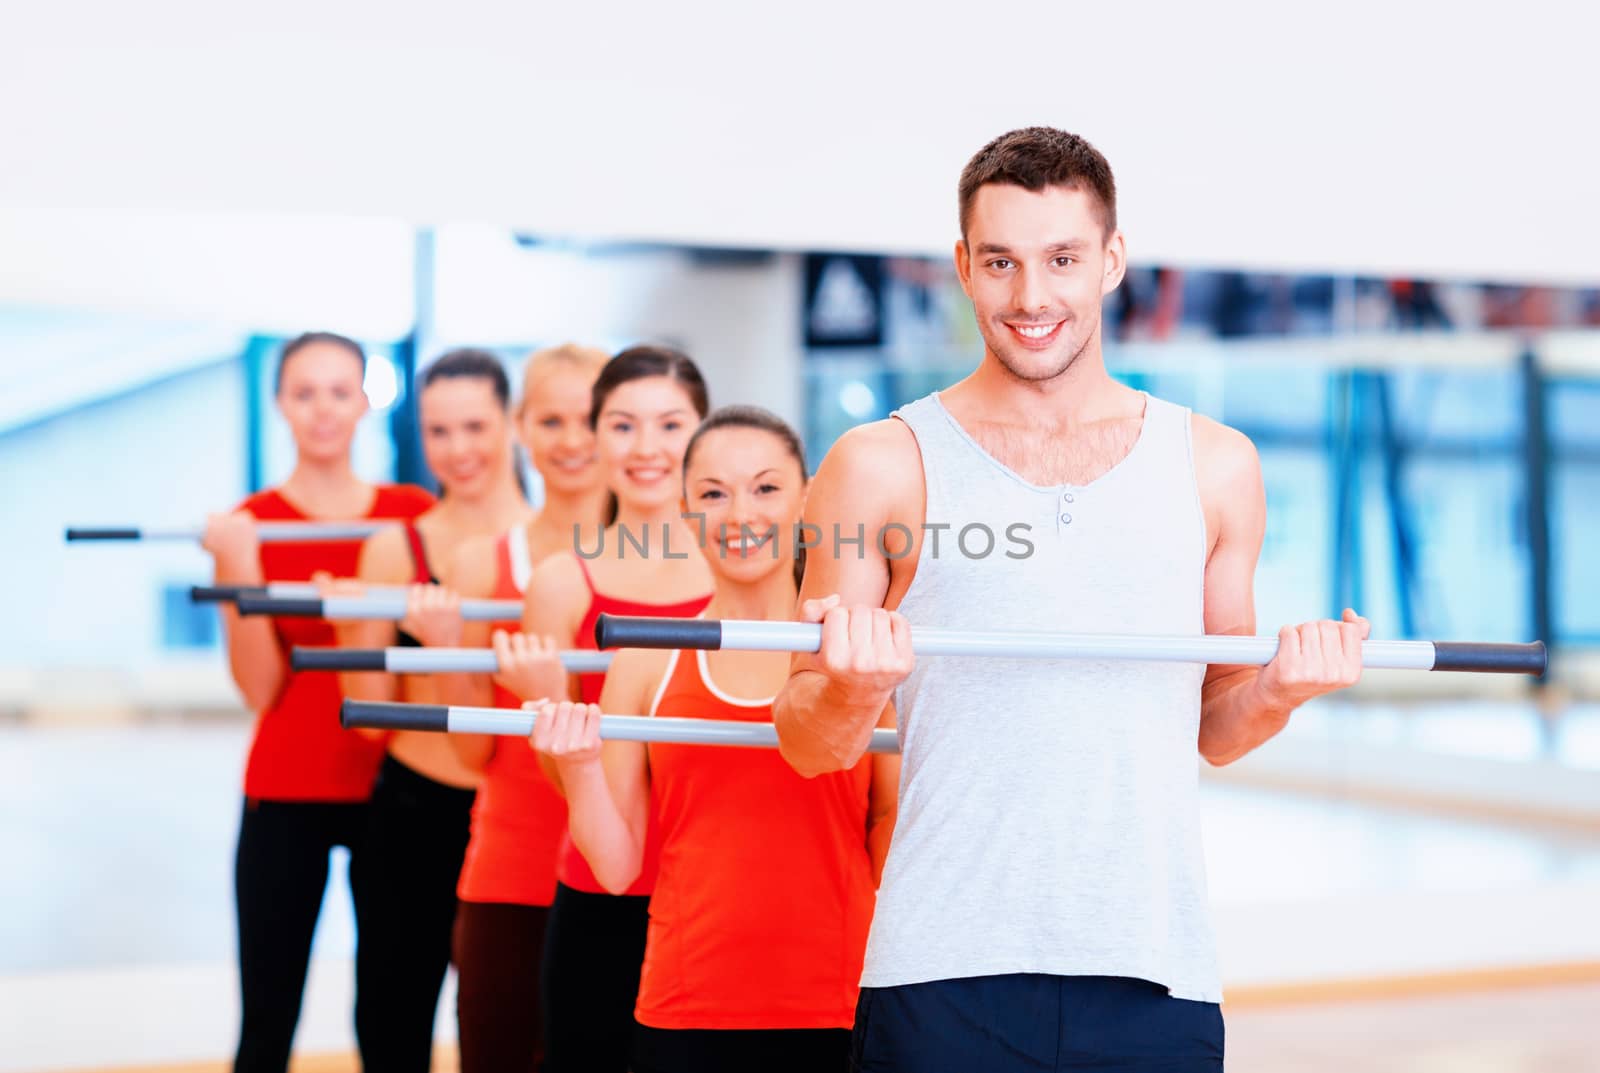 fitness, sport, training, gym and lifestyle concept - group of smiling people working out with barbells in the gym